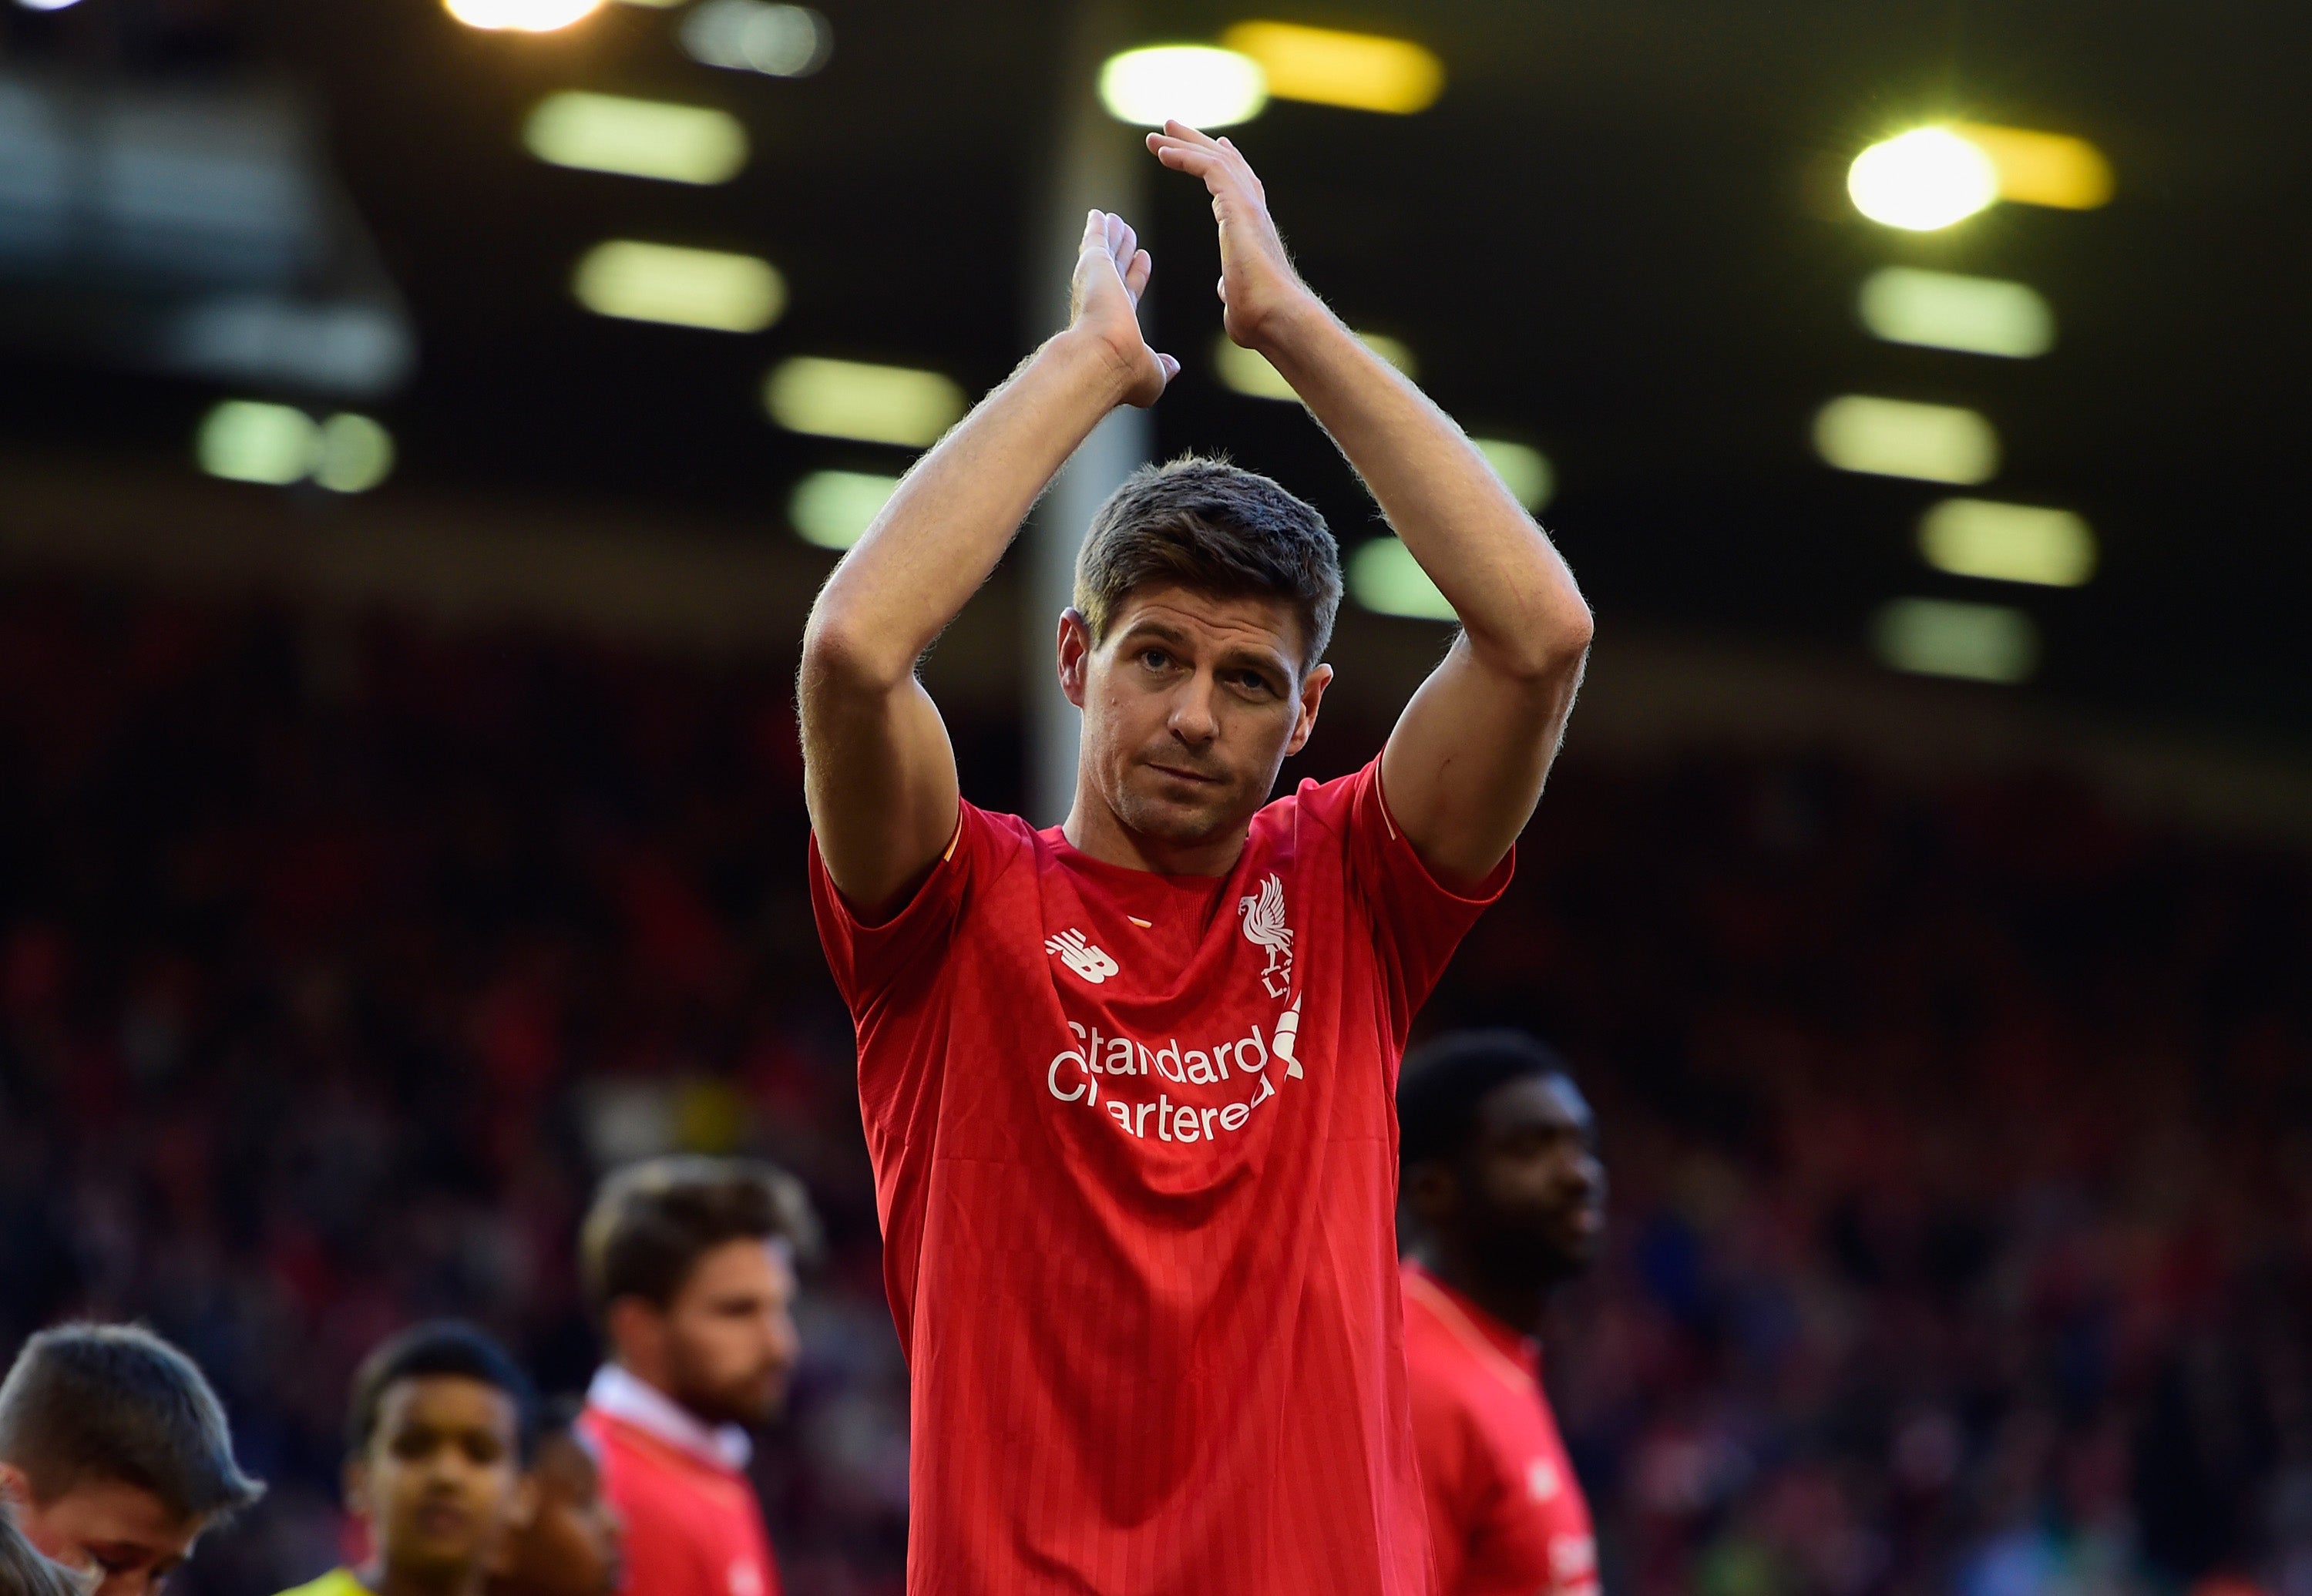 The love for Gerrard around Anfield is sincere. His difficult times are now largely airbrushed out of history but his peaks outweighed the lows